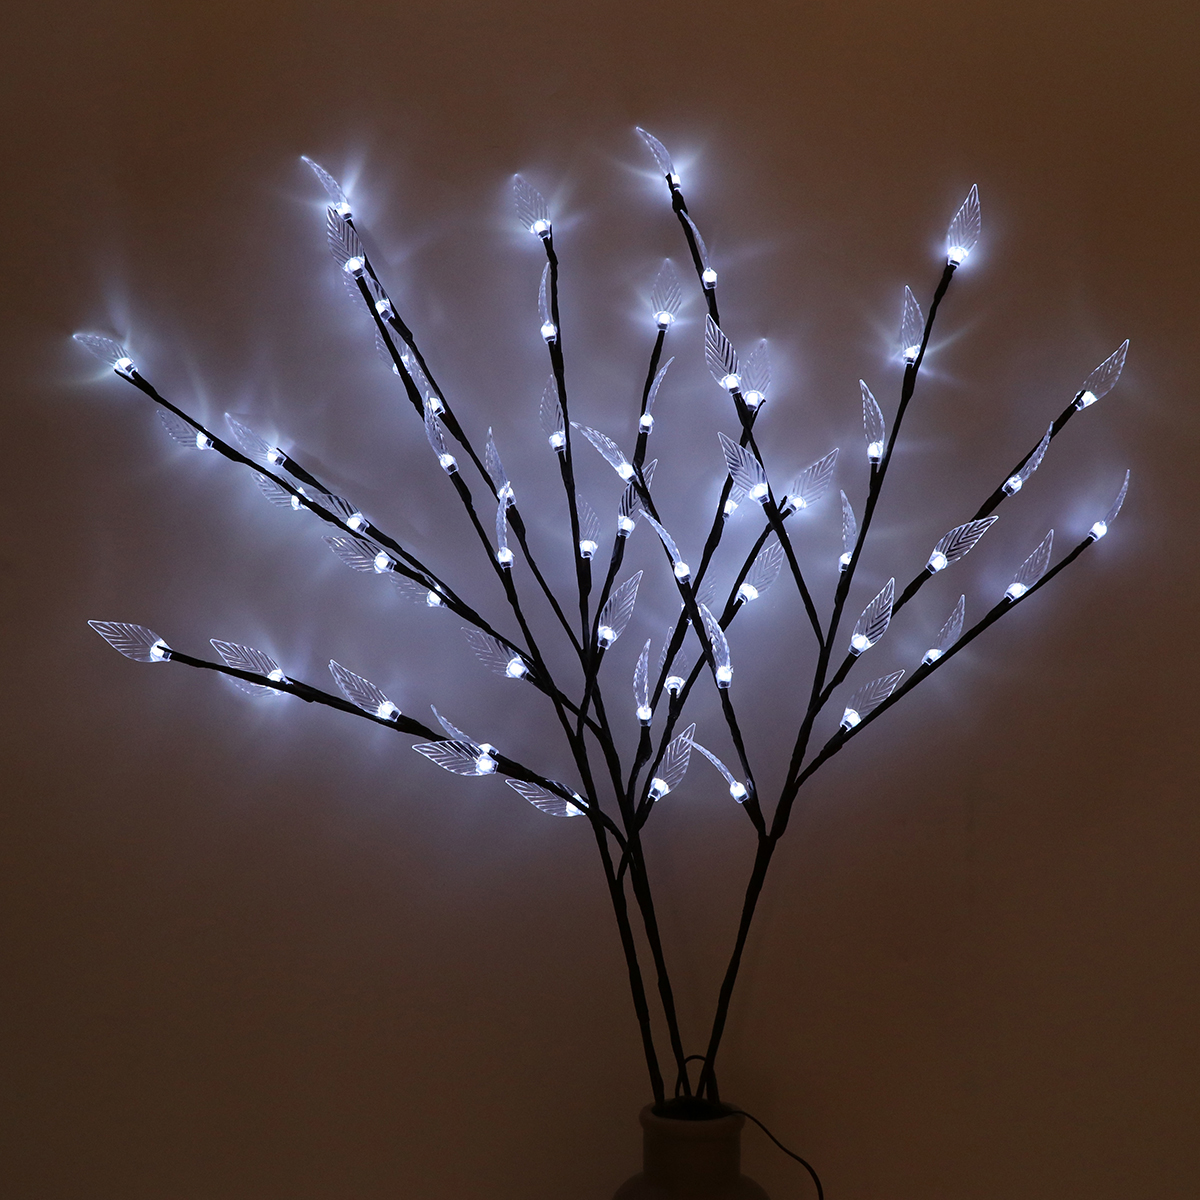 3PCS-LED-Solar-Powered-Lawn-Light-Tree-Branches-Ground-Lamp-Outdoor-Garden-Yard-Lighting-Decoration-1735081-5